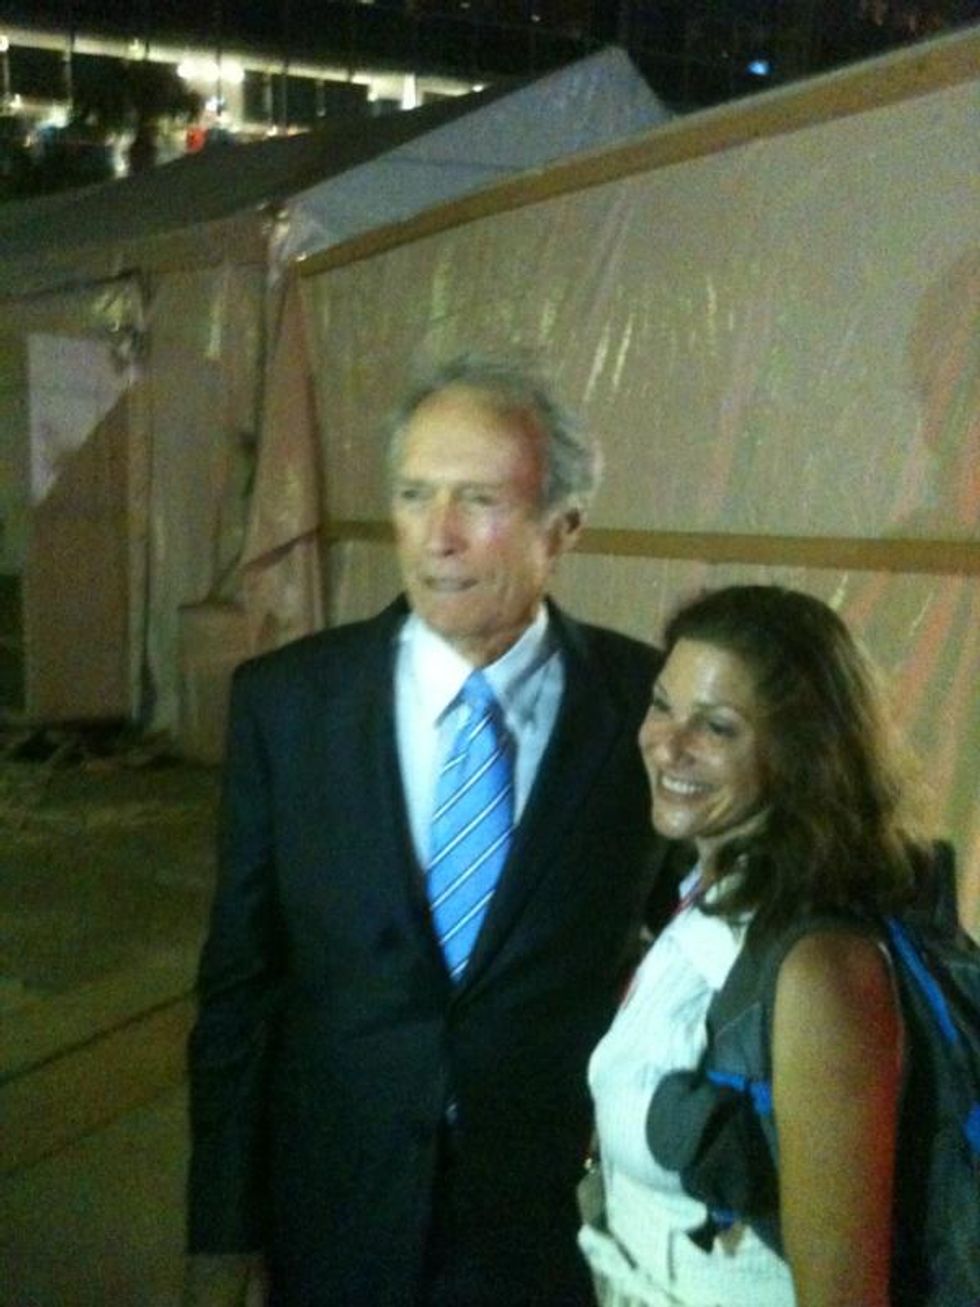 Here Is A Picture Of Your Wonket With Clint Eastwood, Right After His Terrific RNC Speech